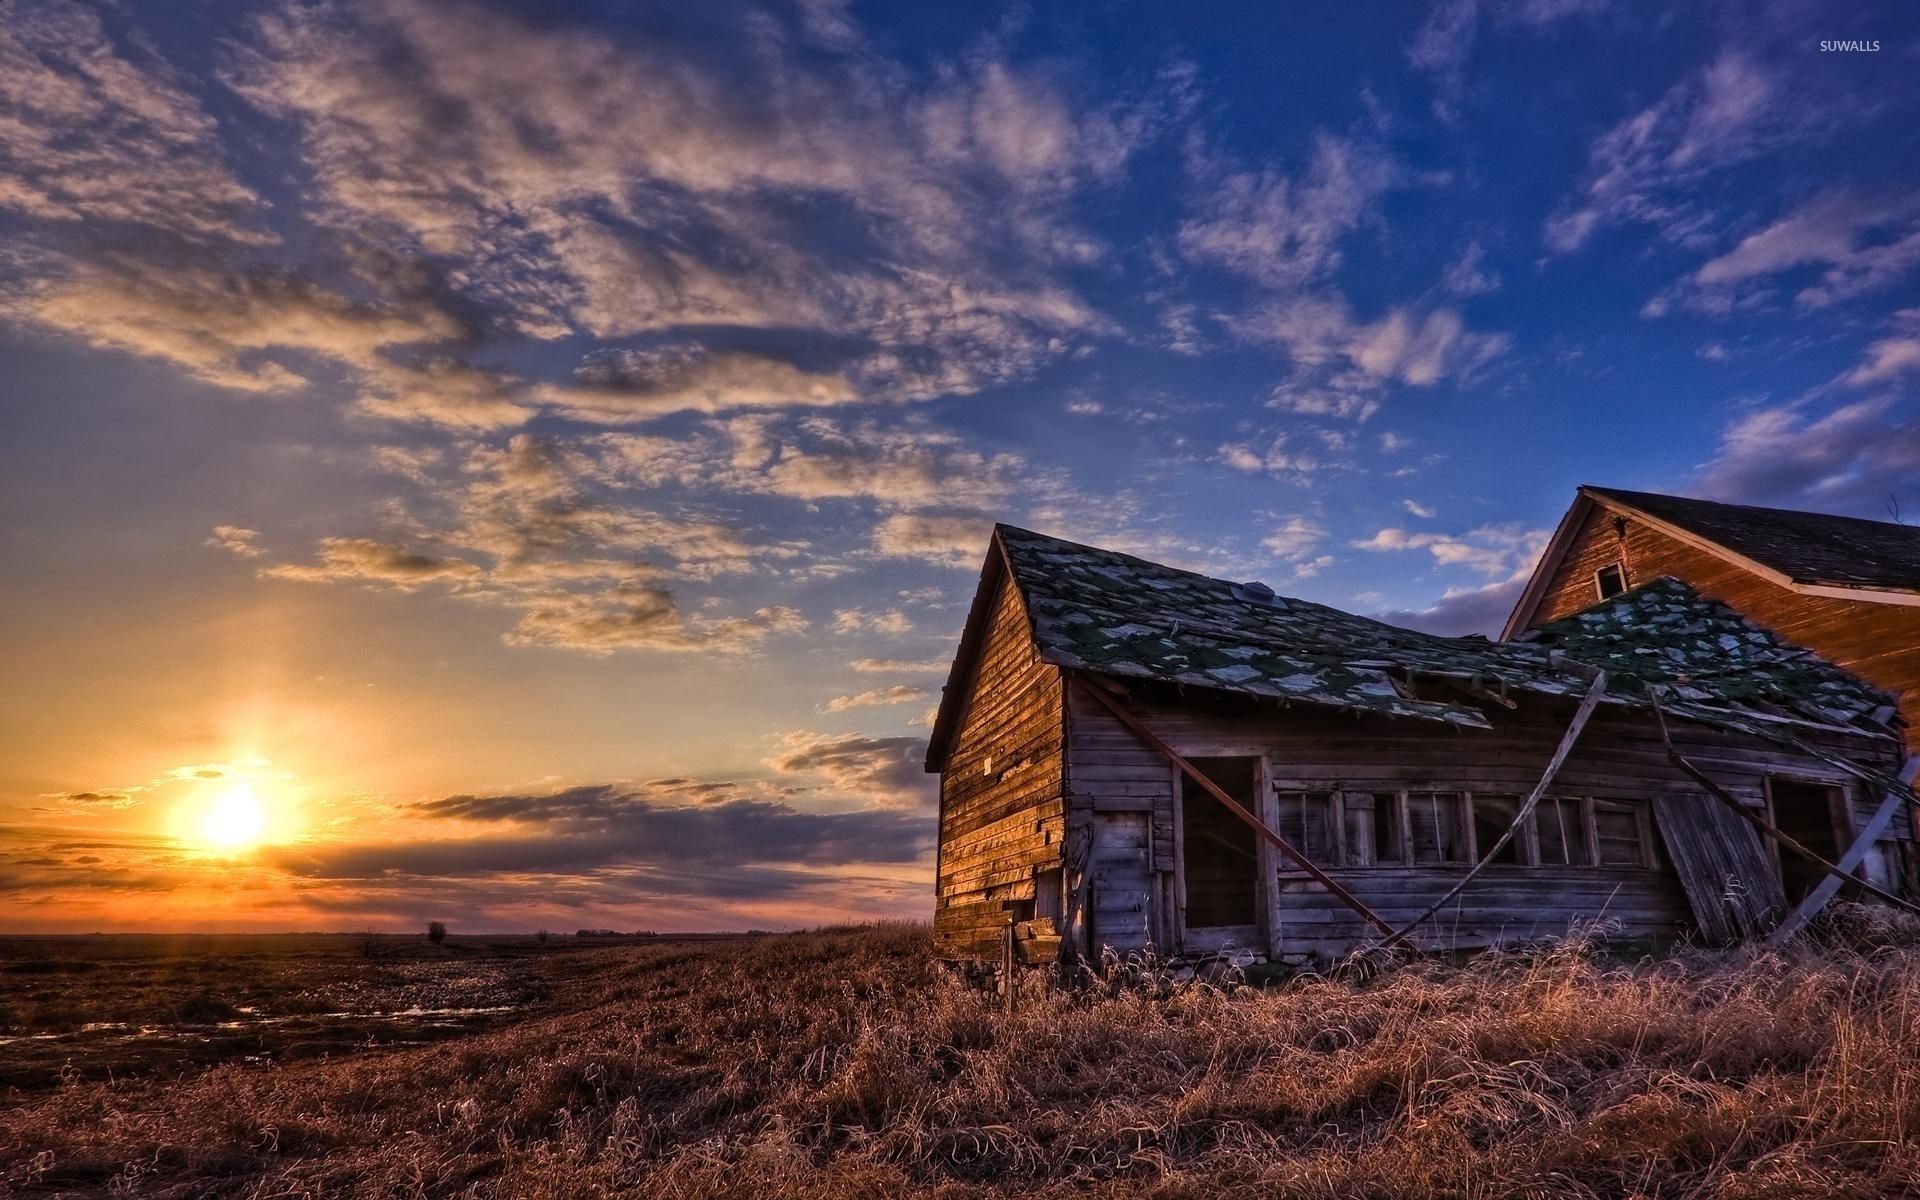 Amazing sunset sky above the forgotten house on the field